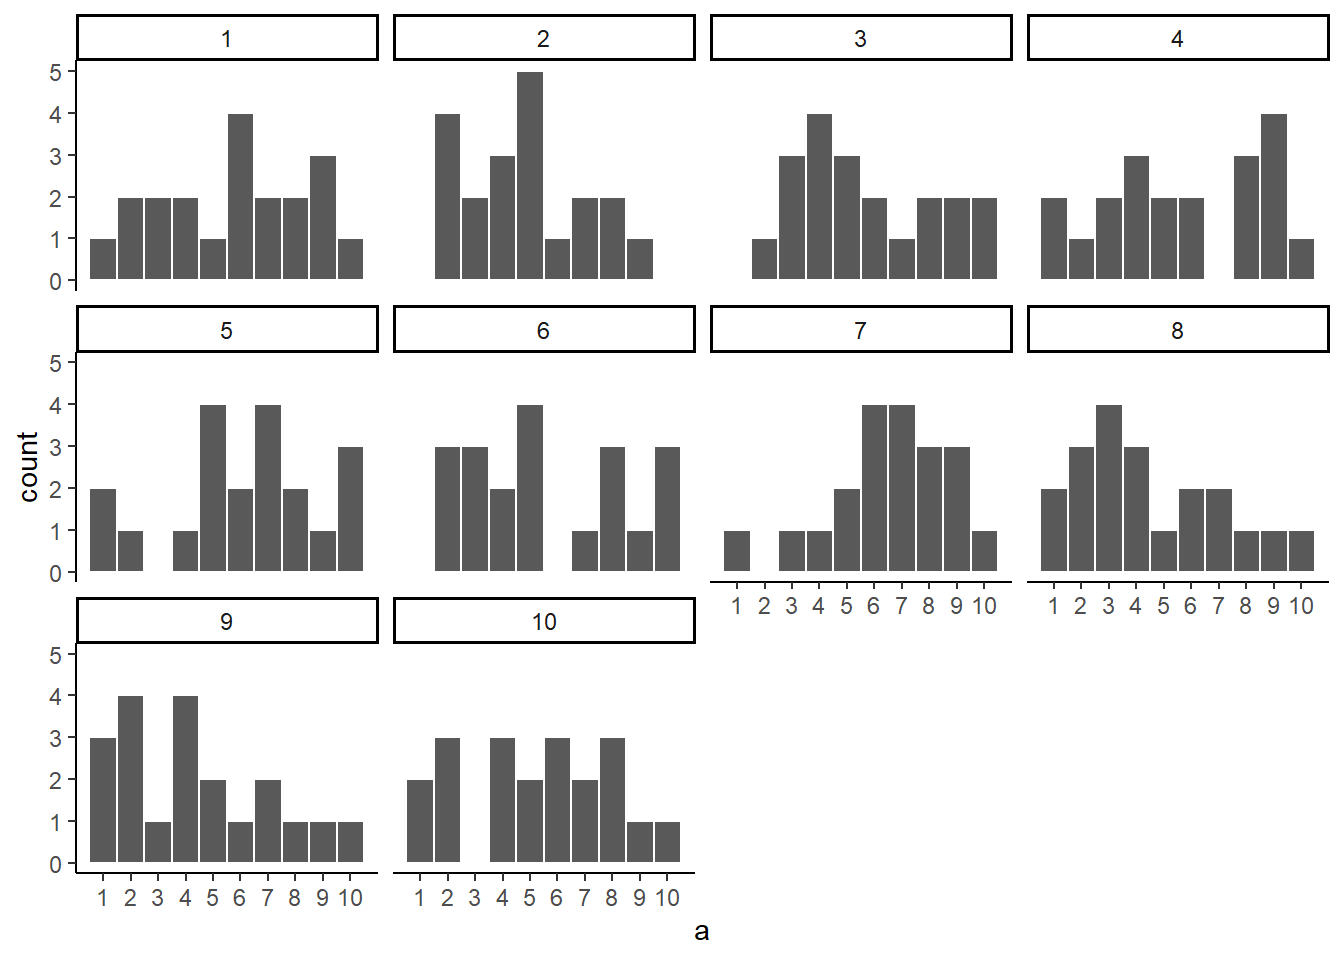 Histograms for 10 different samples from the uniform distribution. They all look quite different. The differences between the samples are due to sampling error